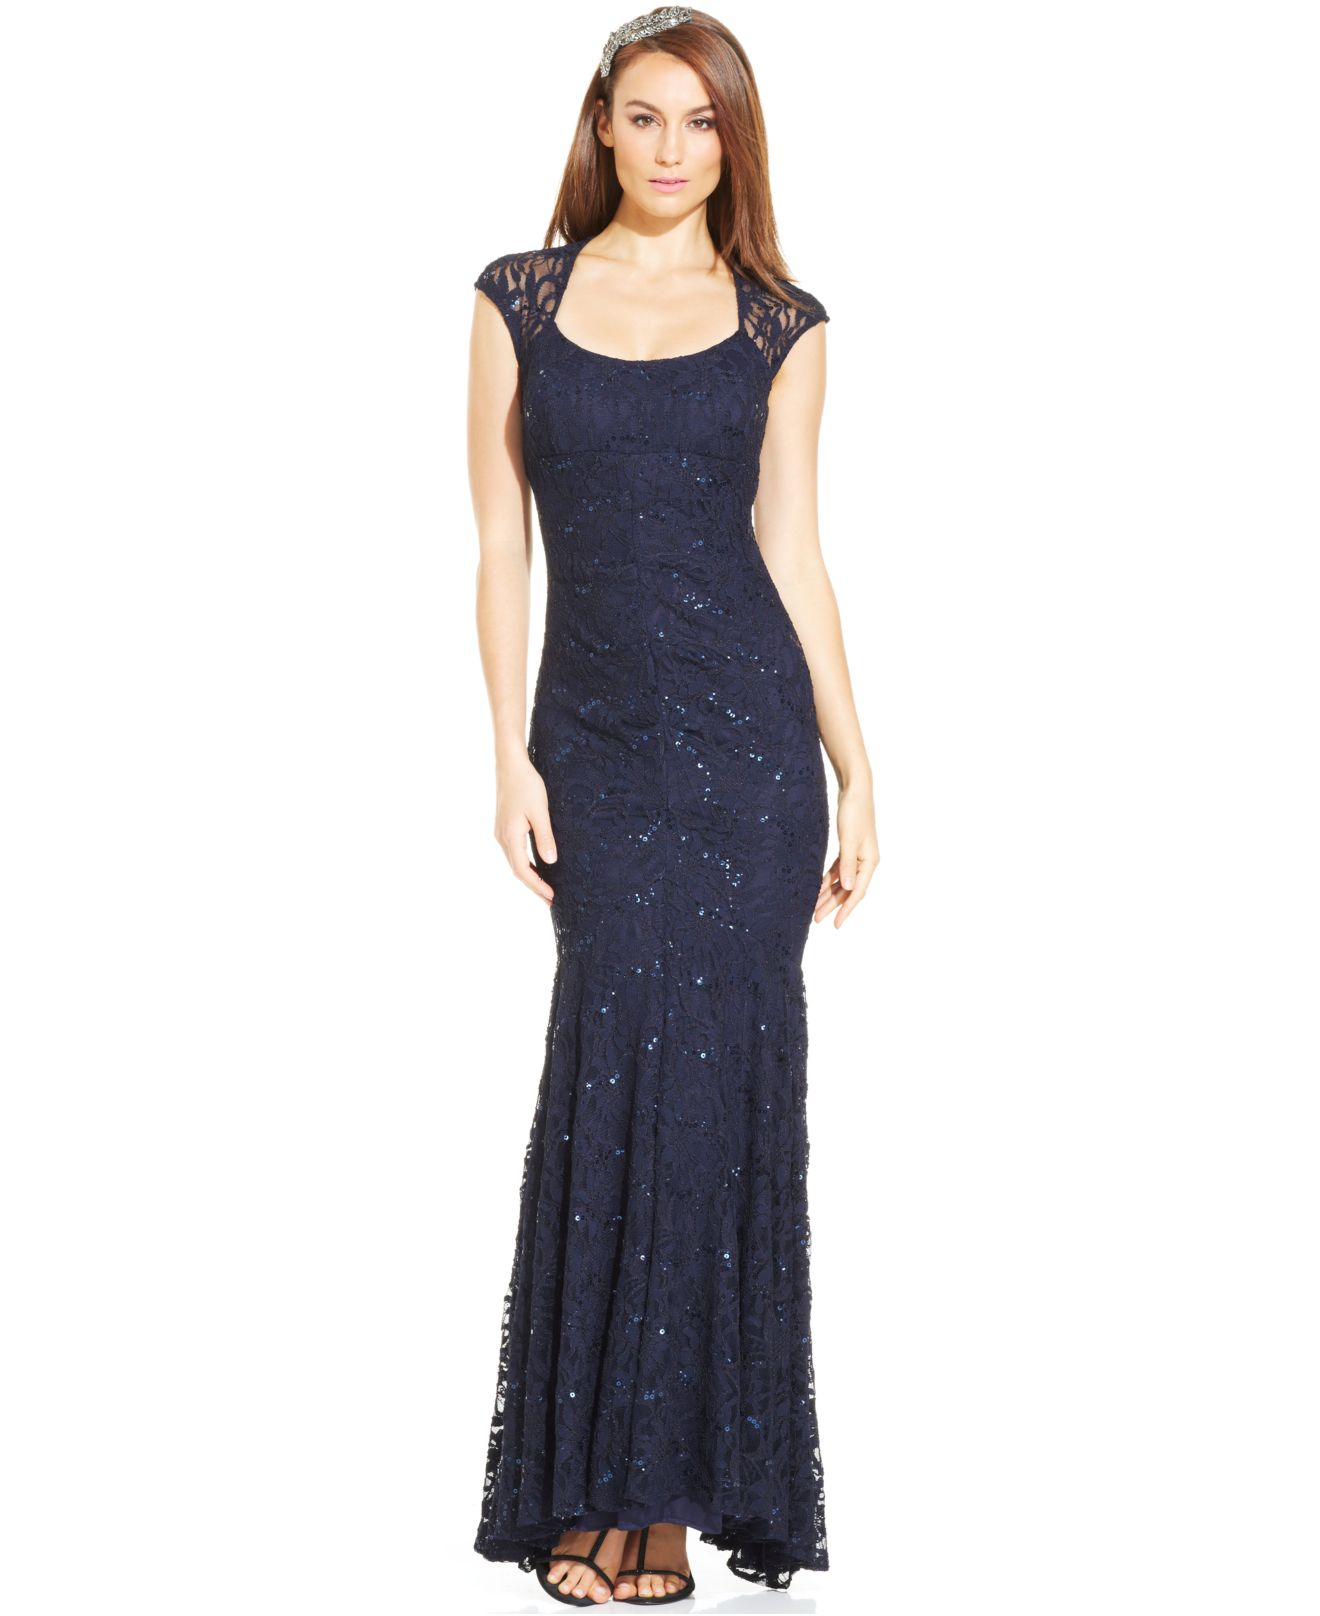 Lyst - Xscape Sequin Lace Mermaid Gown in Blue